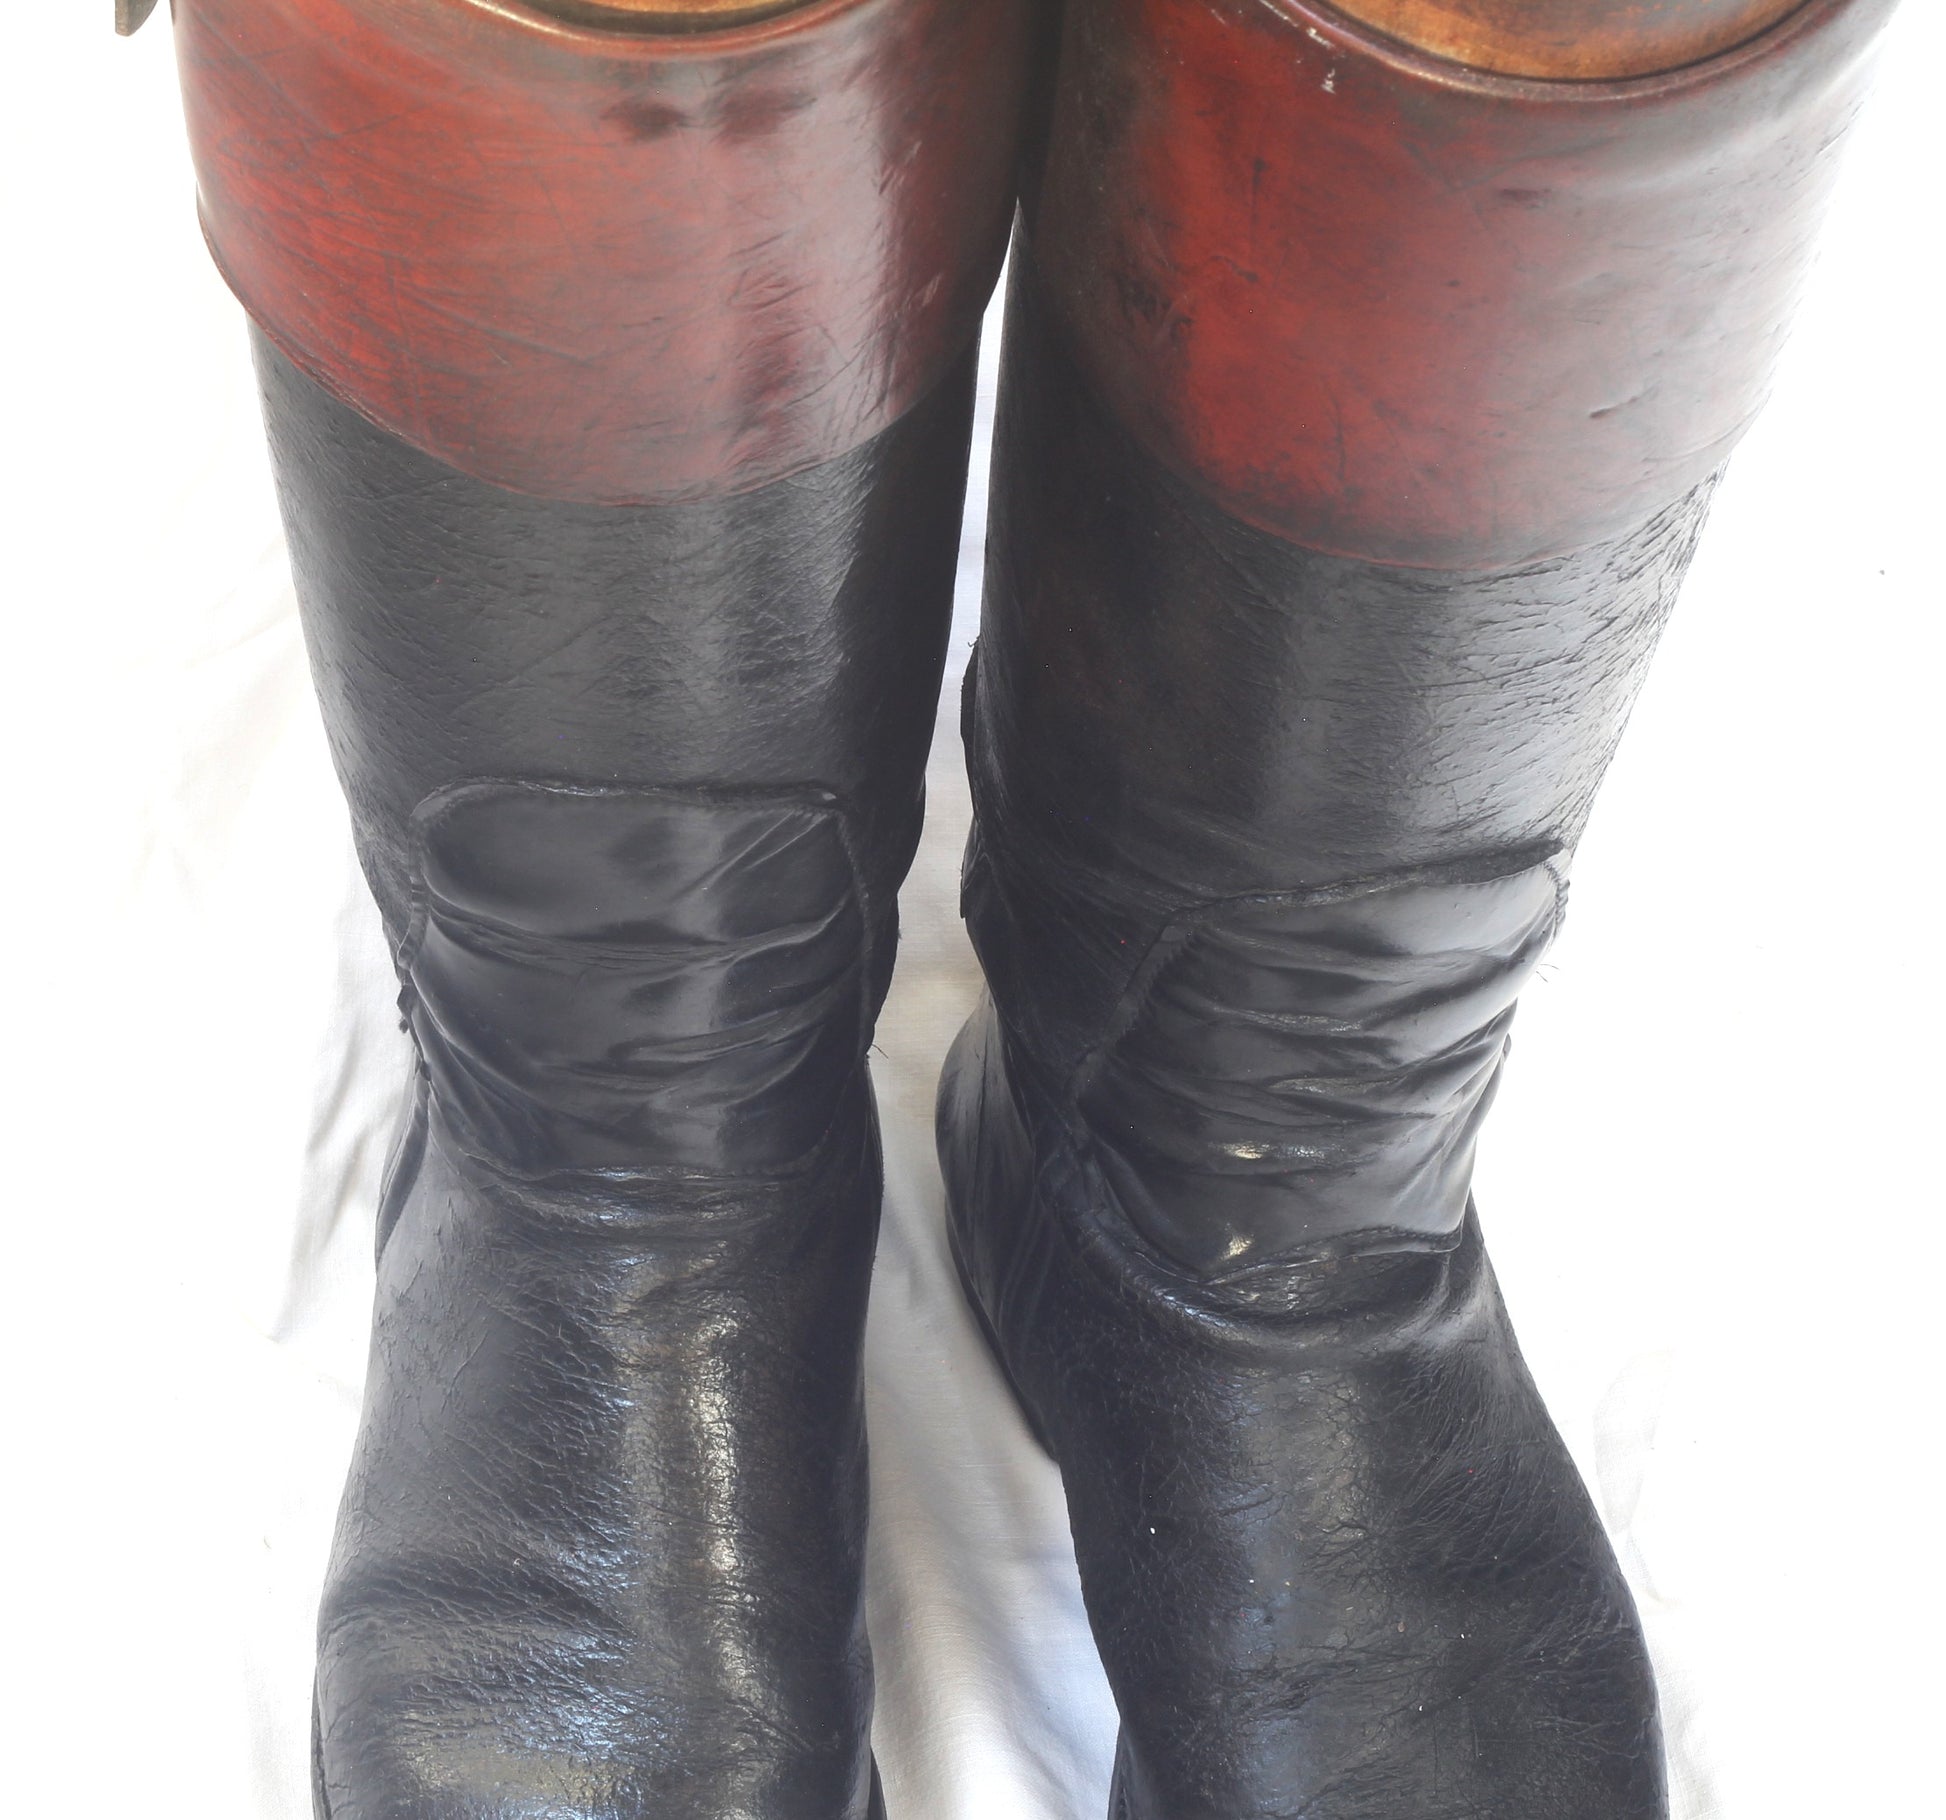 Vintage  Leather Hunting Top Boots and Trees